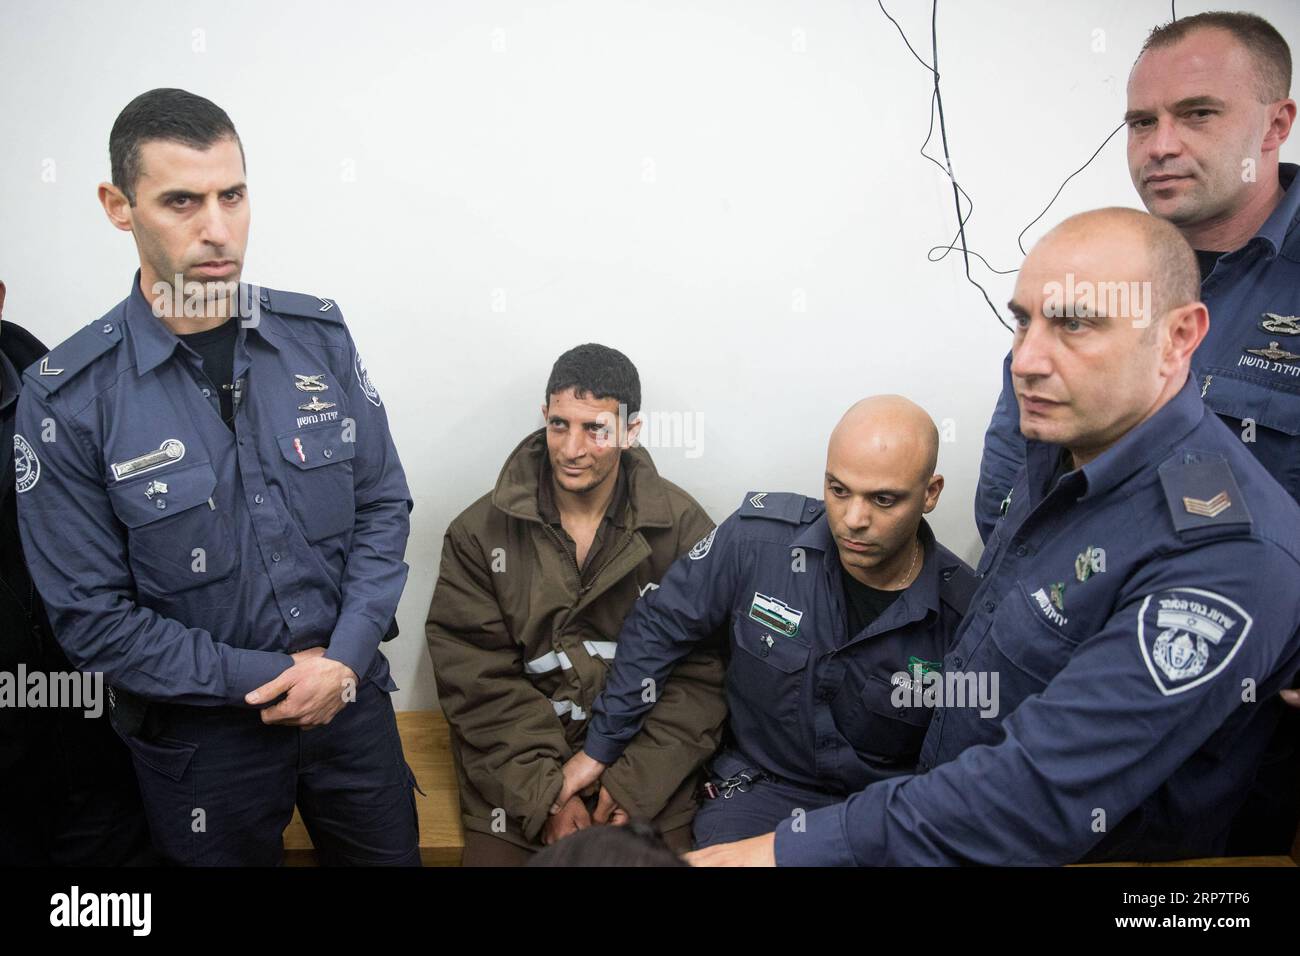 (190211) -- JERUSALEM, Feb. 11, 2019 -- Arafat Irfayia (2nd L) appears at a courtroom in Jerusalem, on Feb. 11, 2019. Israel s Shin Bet security service said on Sunday that the killing of a young Israeli woman last week was a terrorist attack carried out by Arafat Irfayia. The Shin Bet said that the interrogation of Arafat Irfayia, arrested on Friday in the West Bank city of Ramallah, showed the killing was nationalistically-motivated. ) MIDEAST-JERUSALEM-KILLING-CHARGE JINI PUBLICATIONxNOTxINxCHN Stock Photo